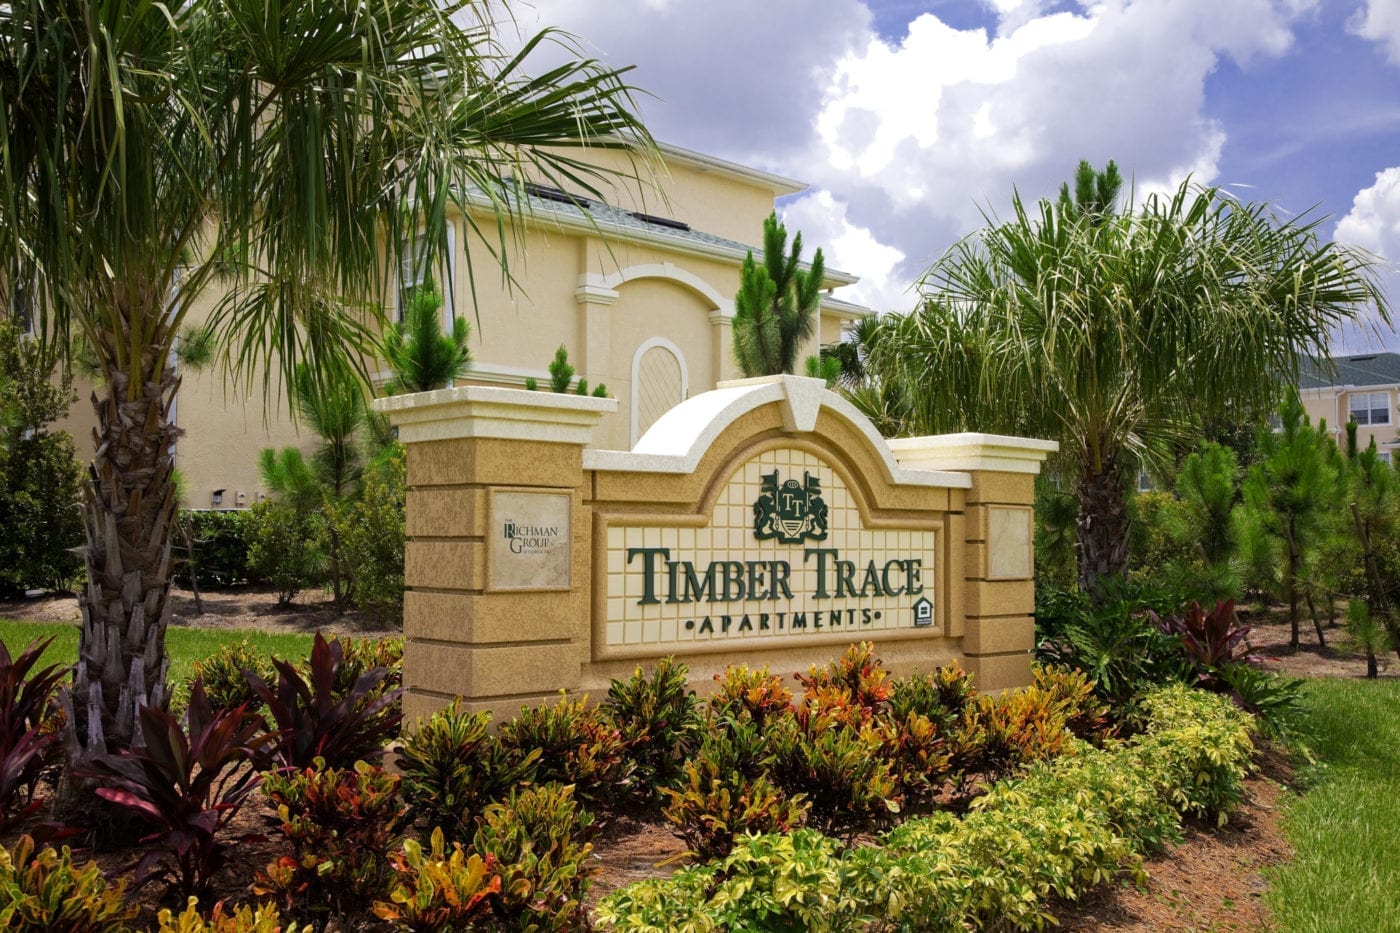 Timber Trace